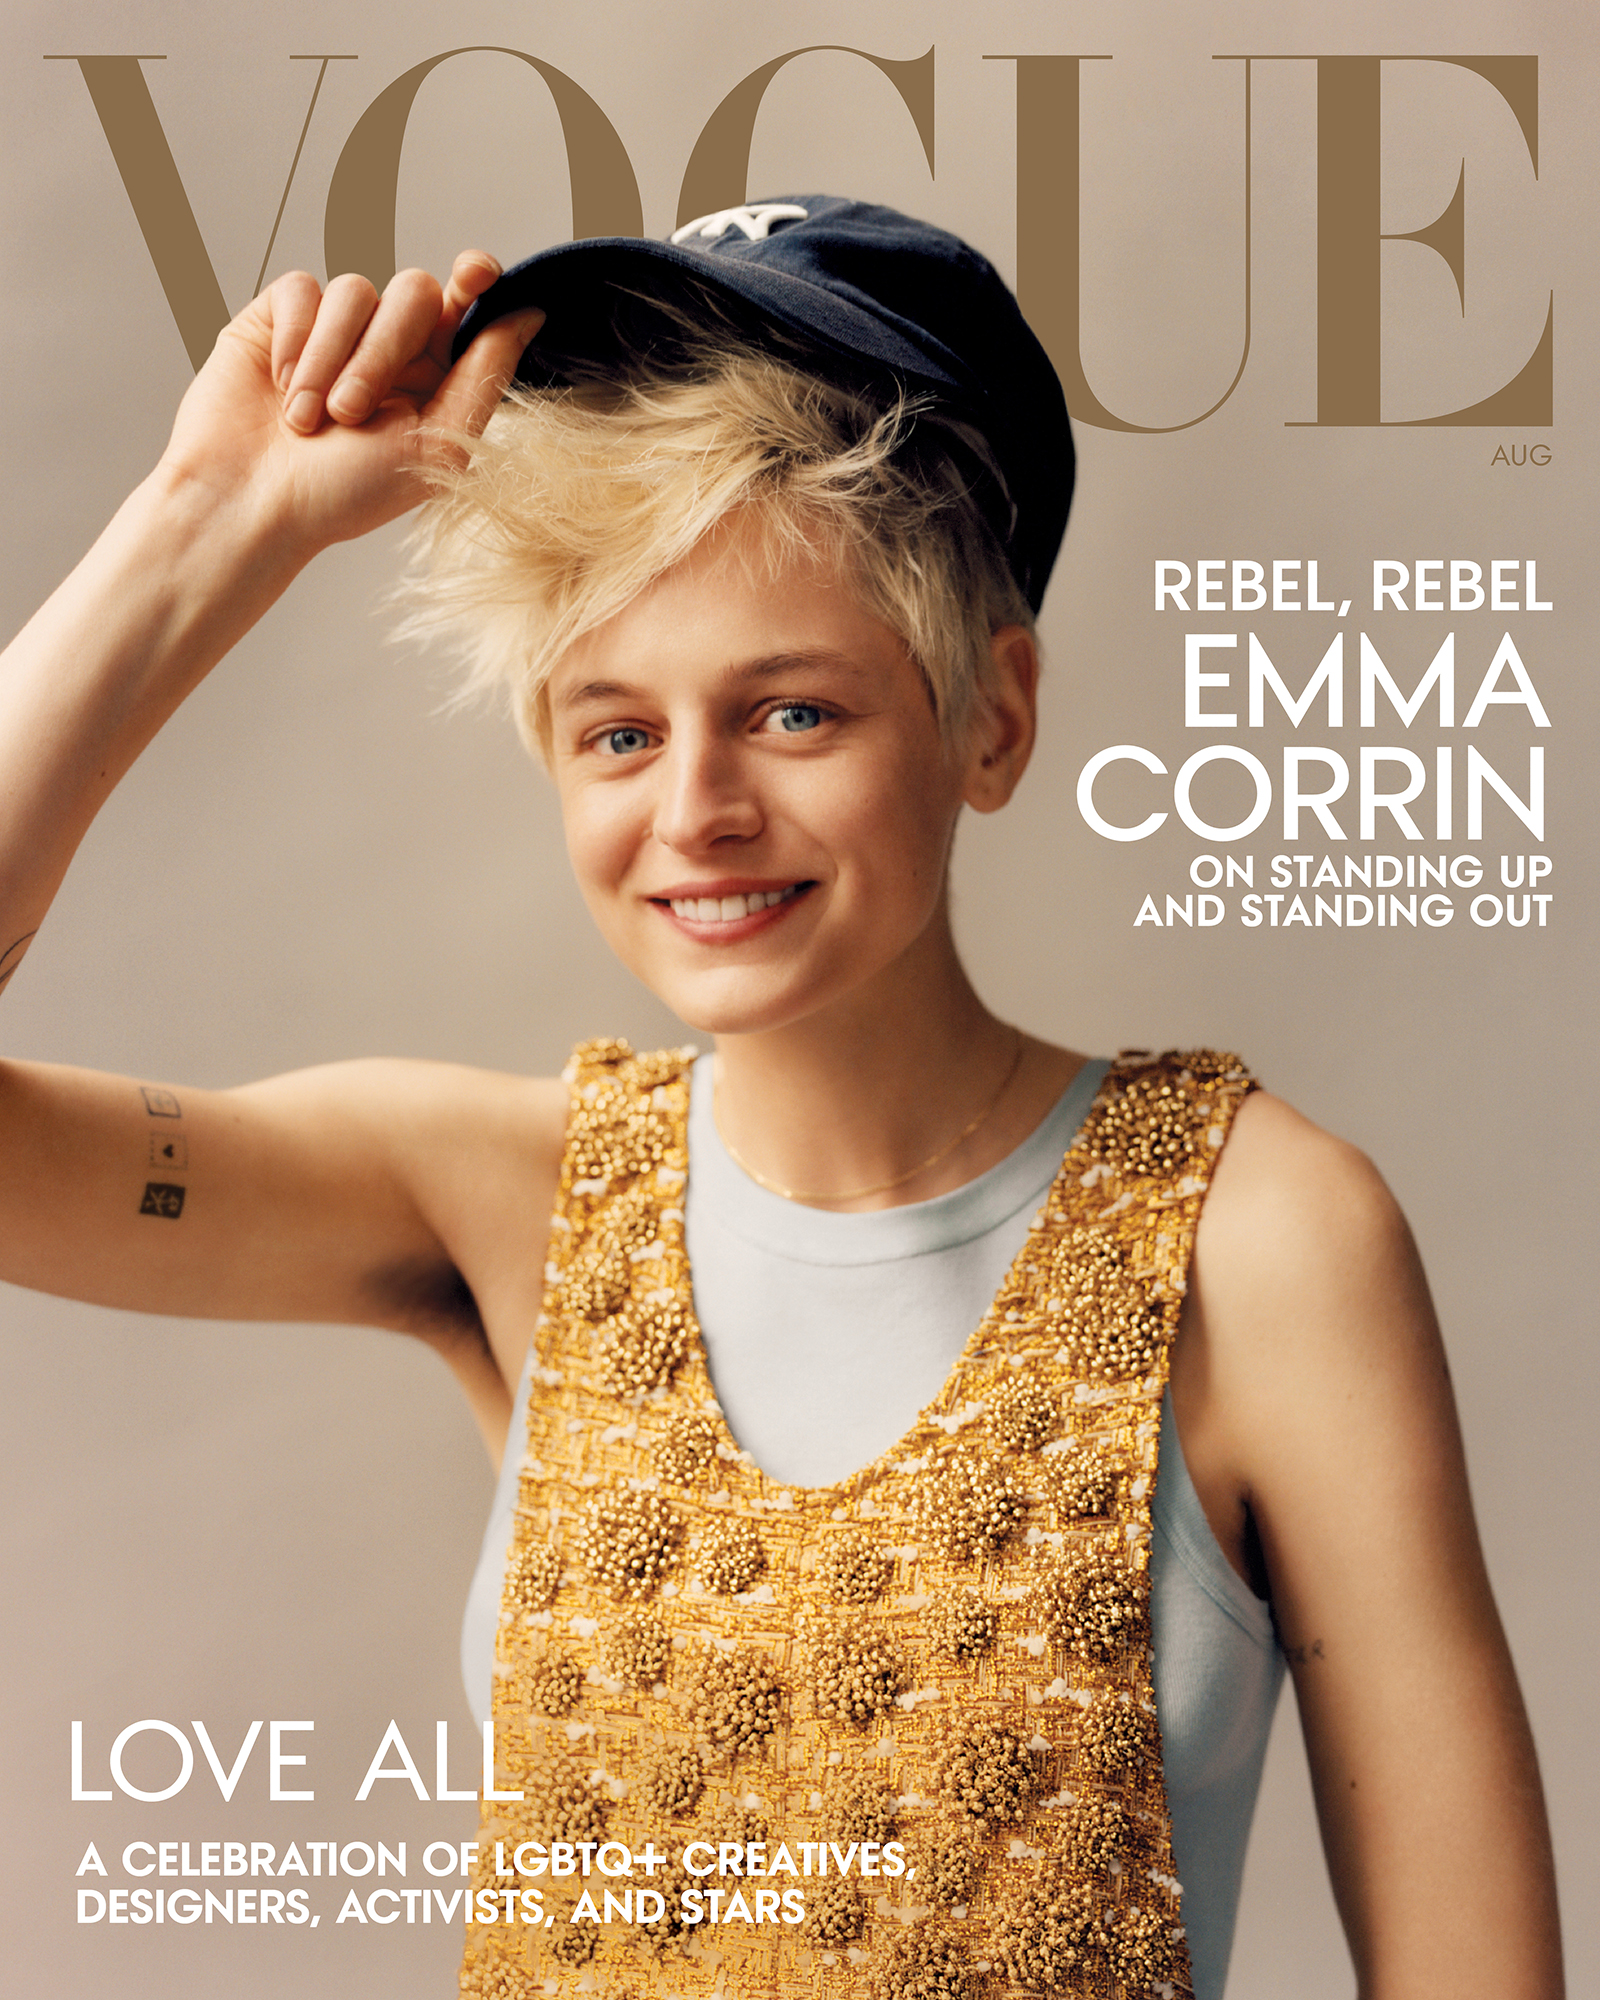 Emma Corrin Shows Off Body Hair on the Cover of 'Vogue'